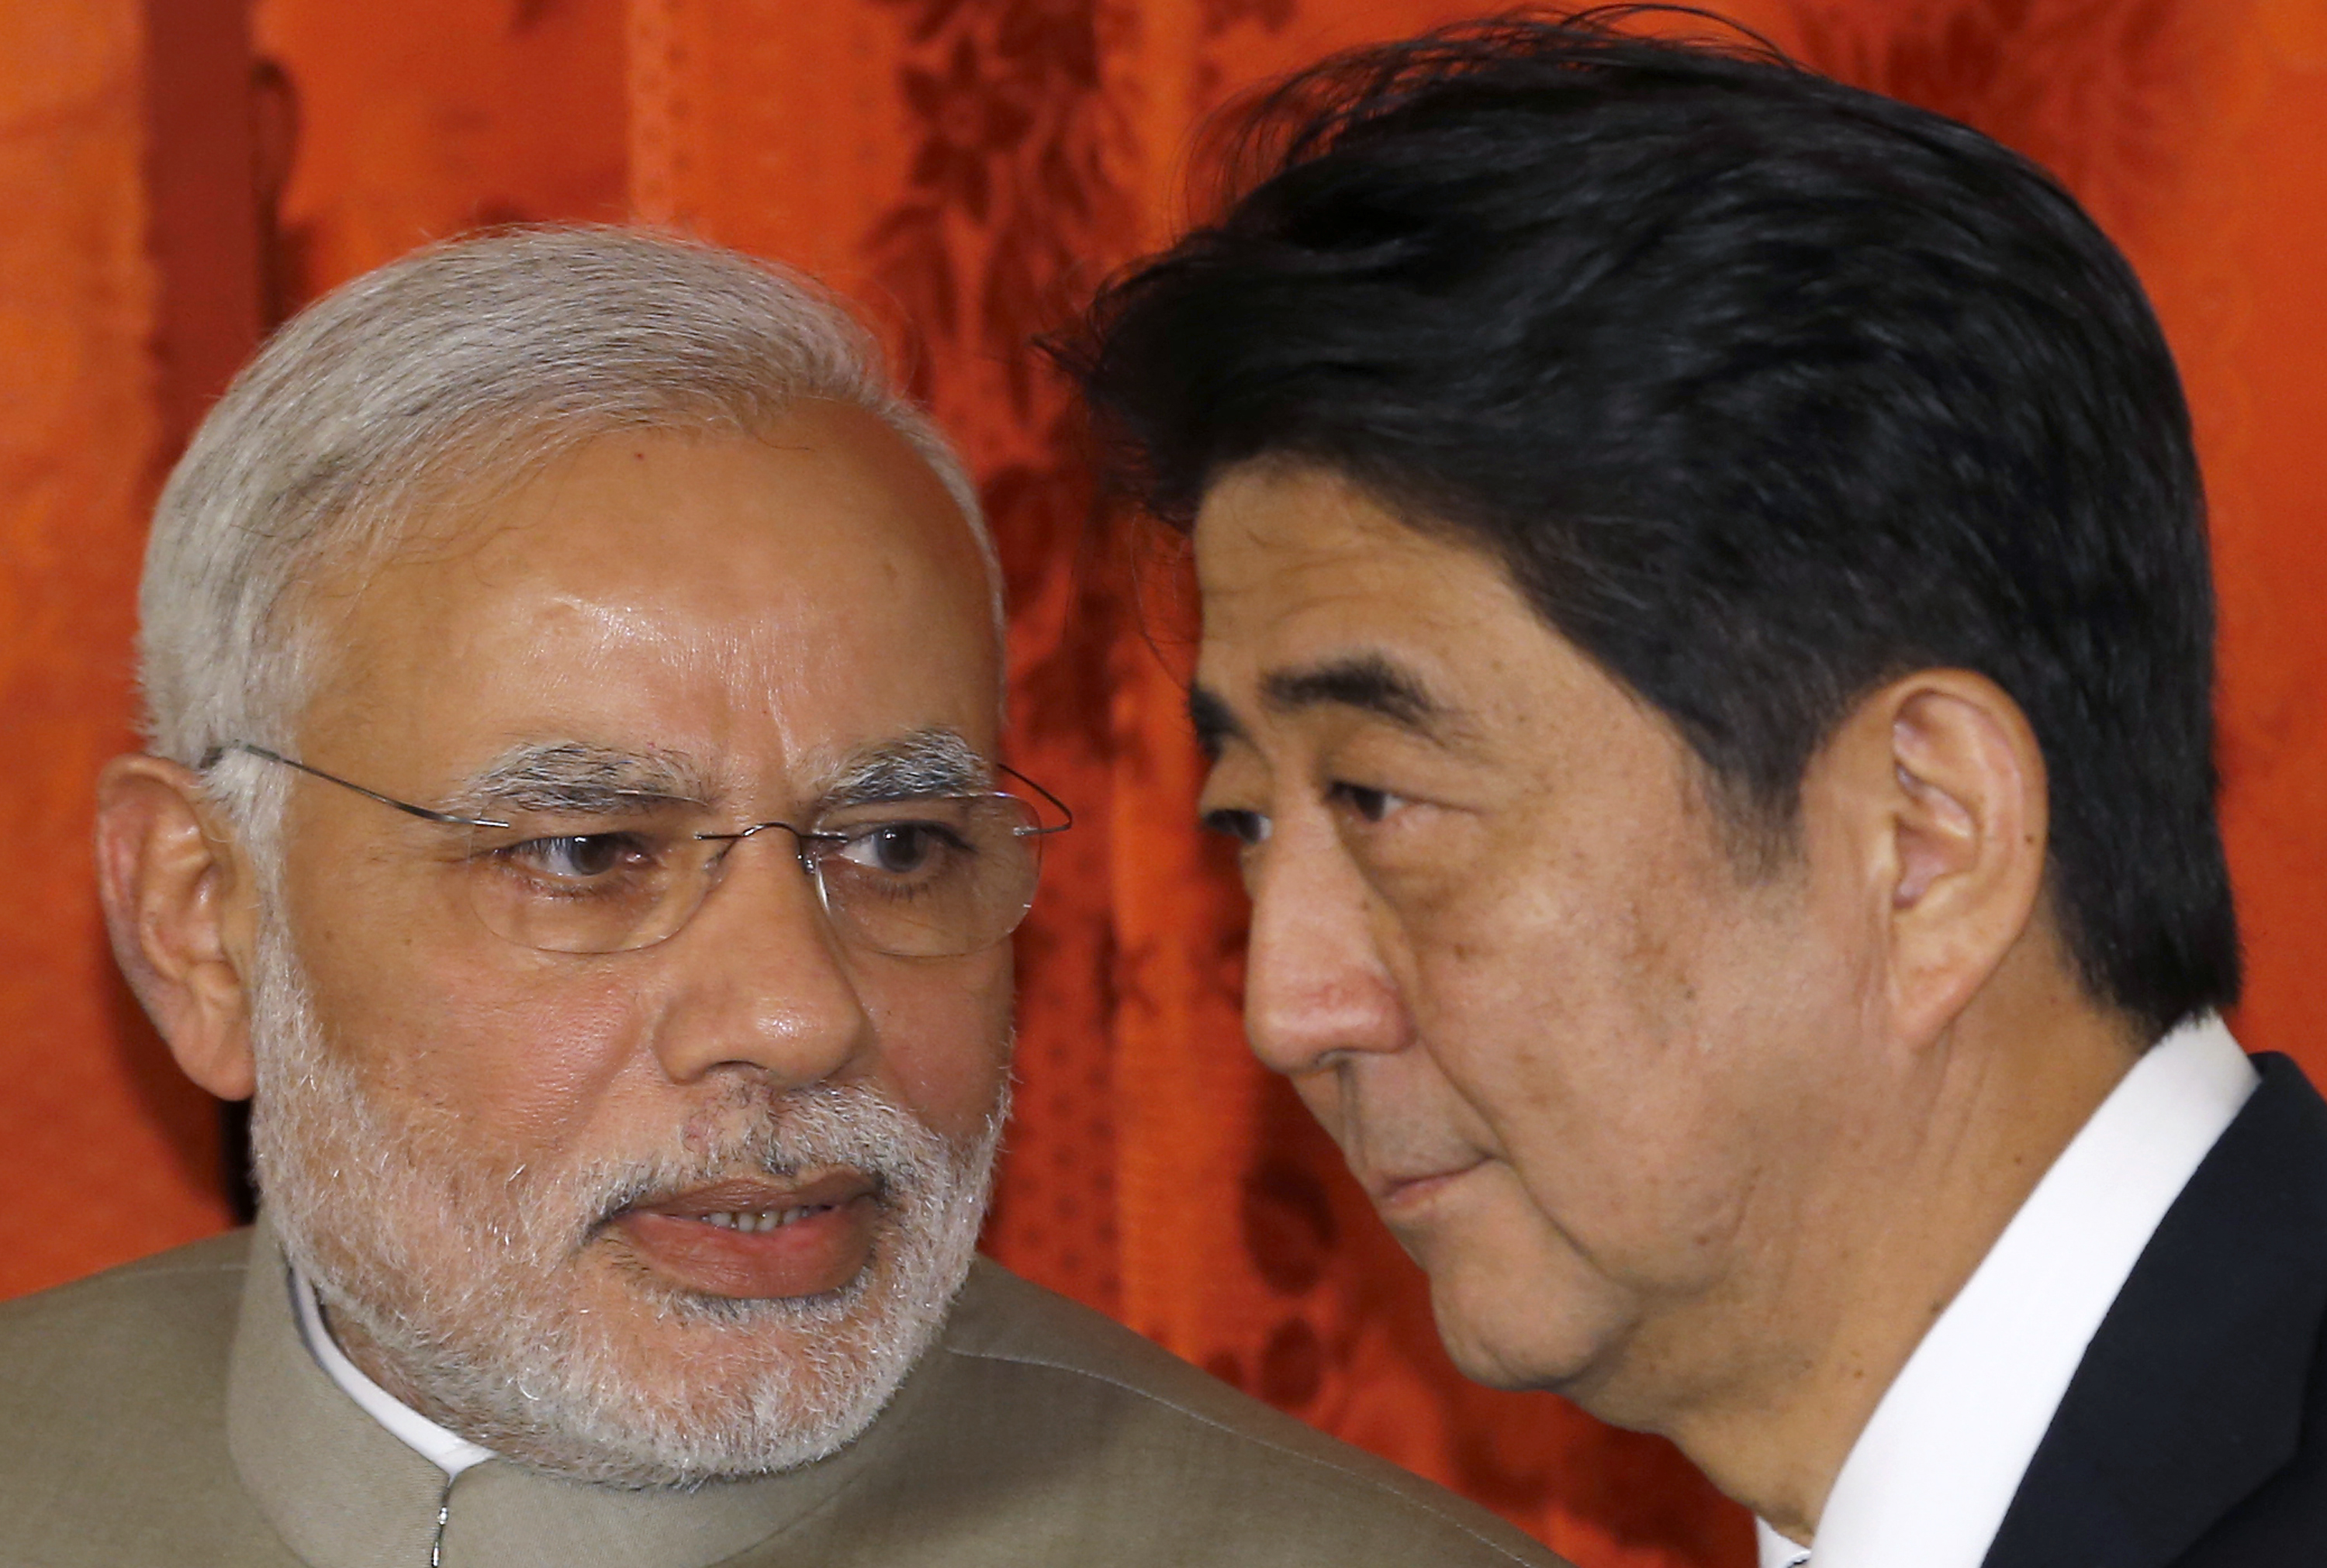 Indian Prime Minister Narendra Modi speaks to Prime Minister Shinzo Abe after their meeting in Tokyo in September 2014. Abe received a birthday message from Modi on Twitter on Monday but sent a reply to the wrong person. | BLOOMBERG